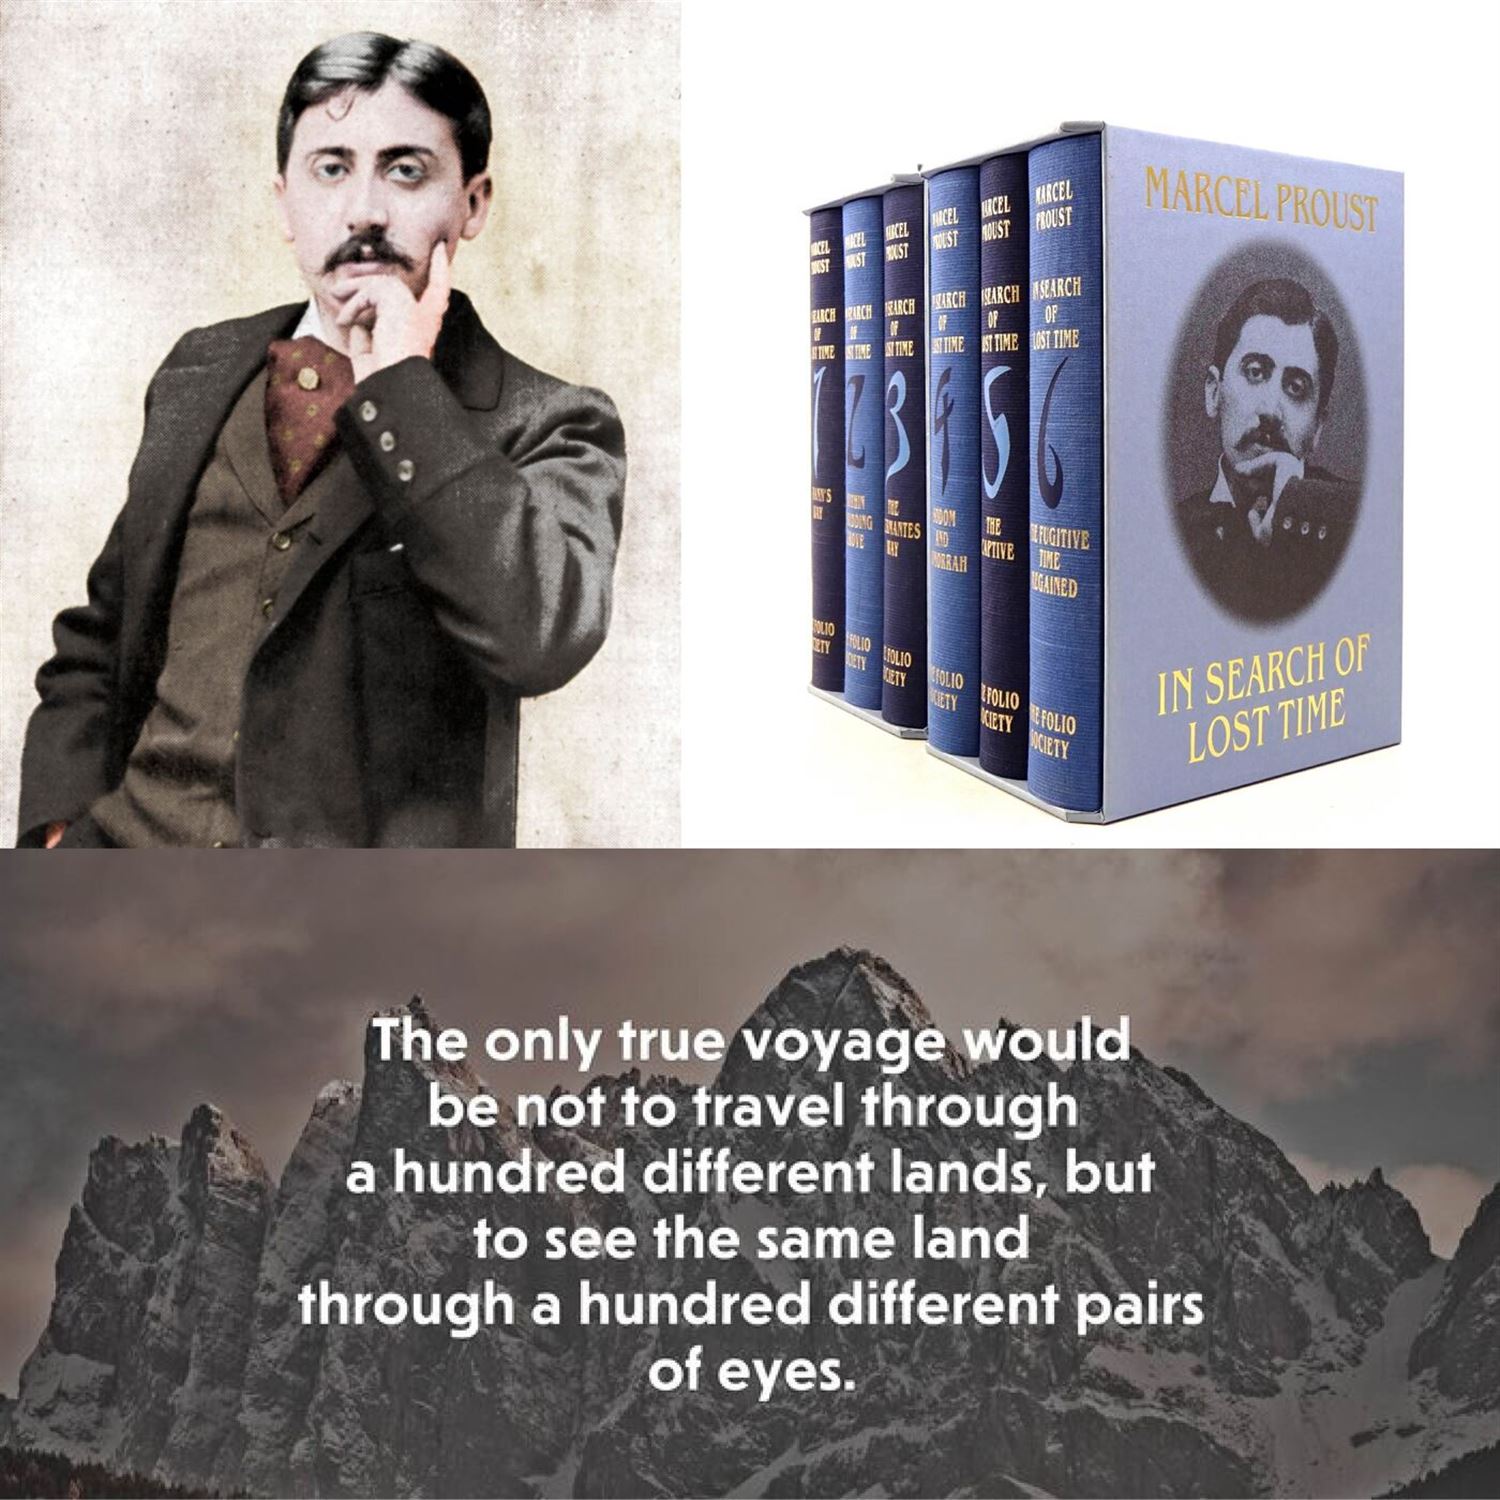 Marcel Proust: In Search Of Lost Time